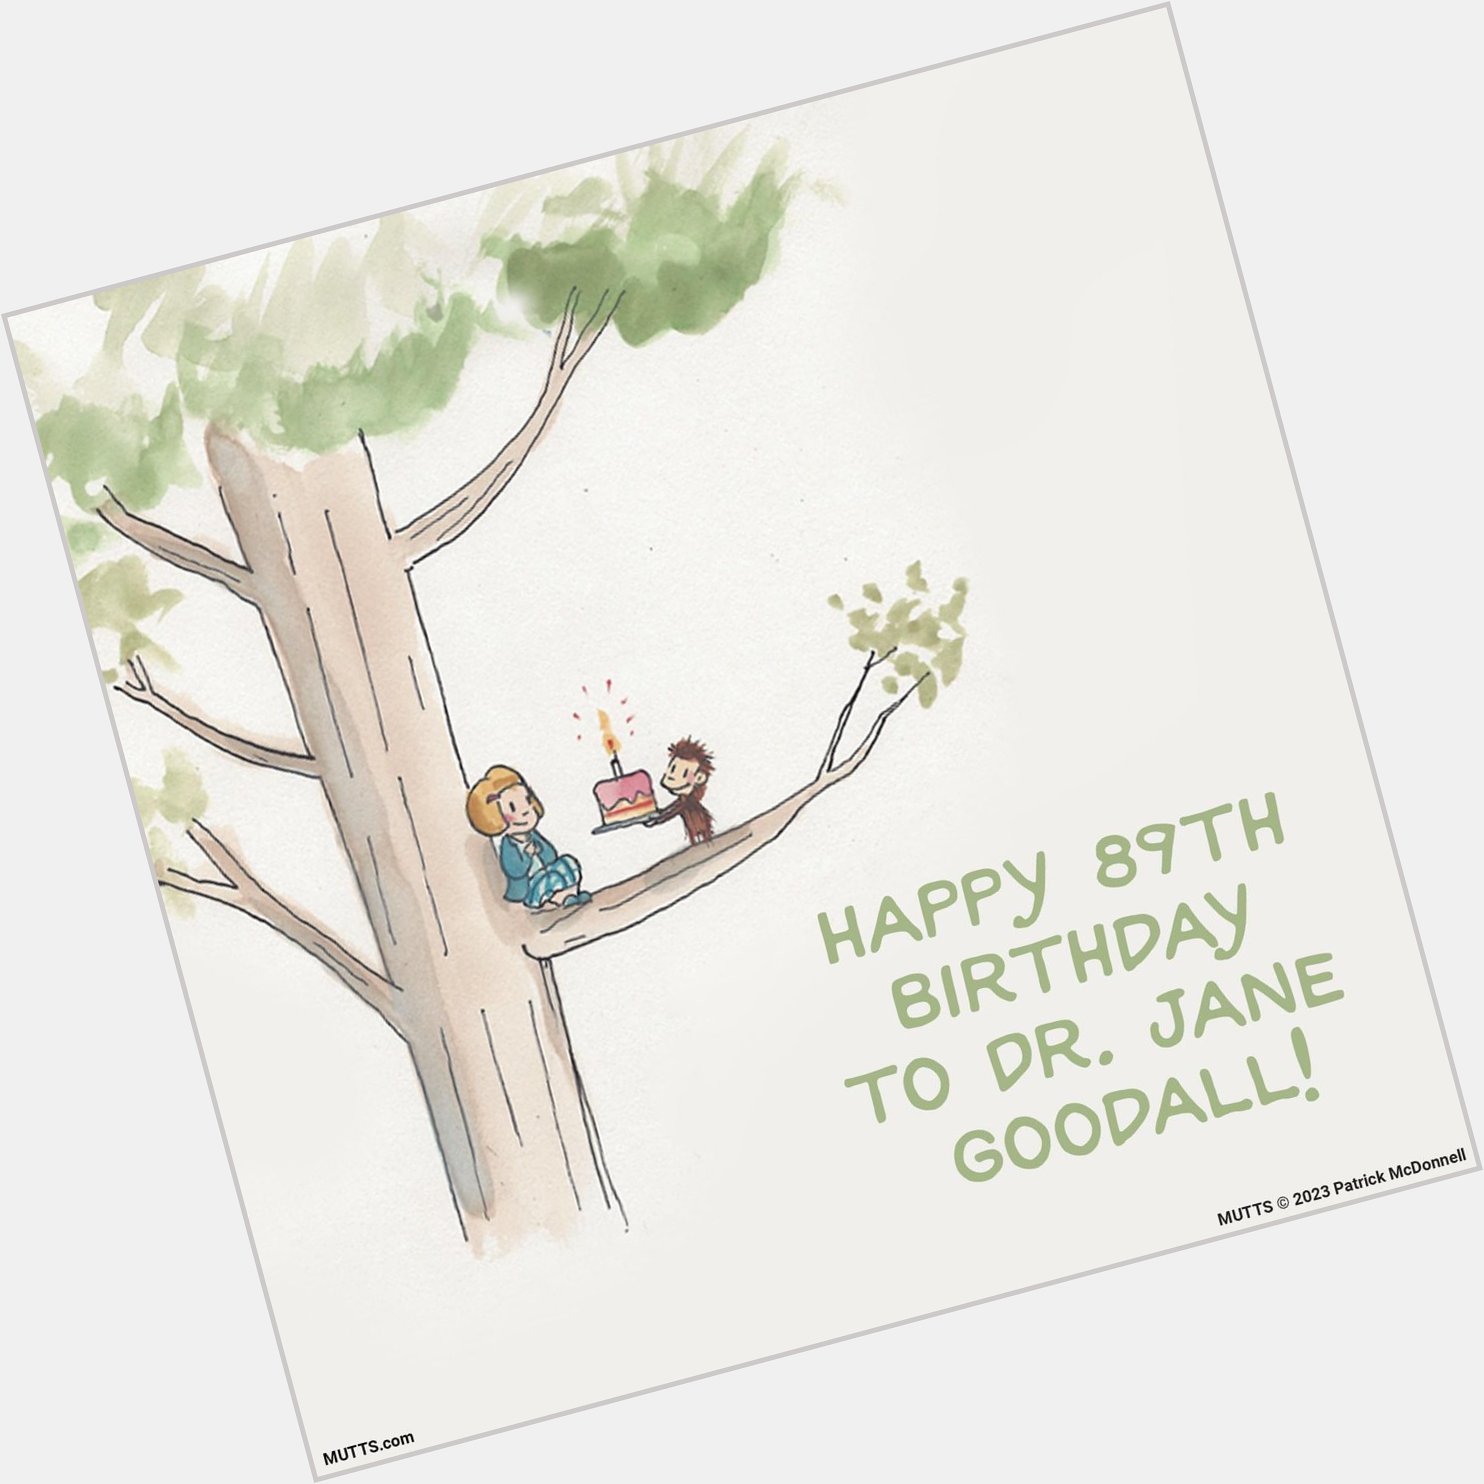 Be kind, be curious, and a friend to all animals!  Happy birthday Dr. Jane Goodall!! 